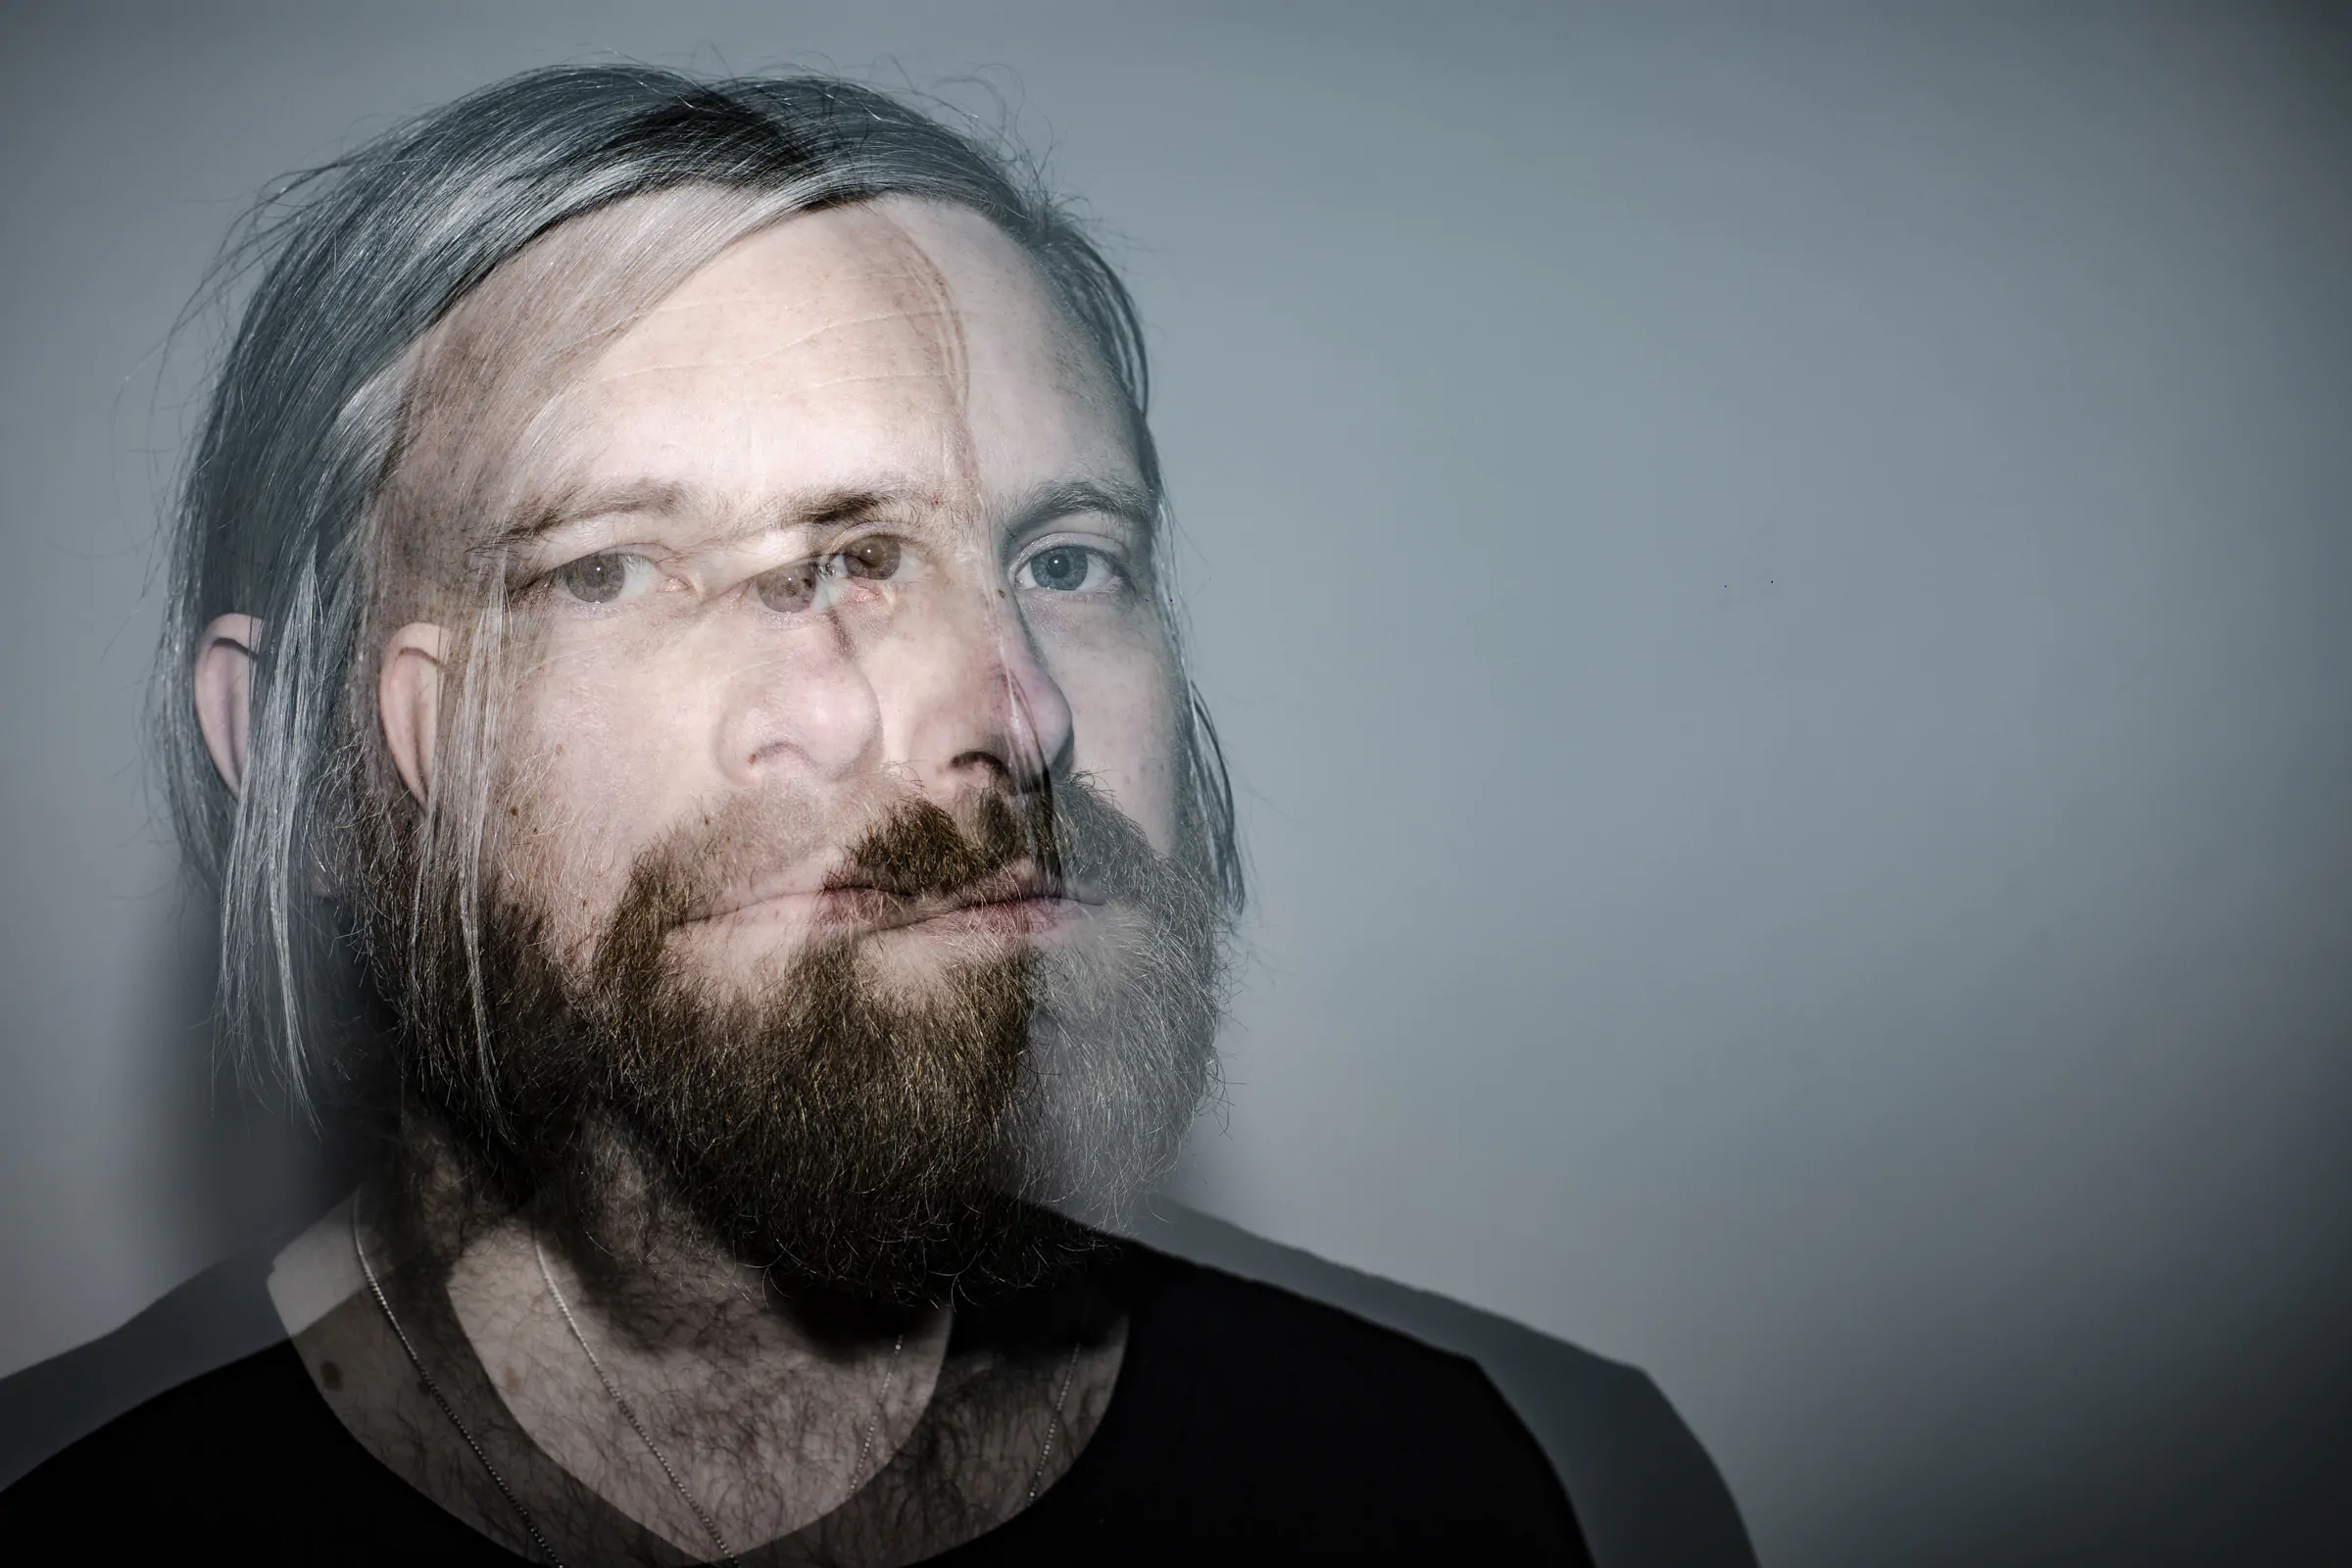 BLANCK MASS announces new record ‘In Ferneaux’ for Feb 26th release